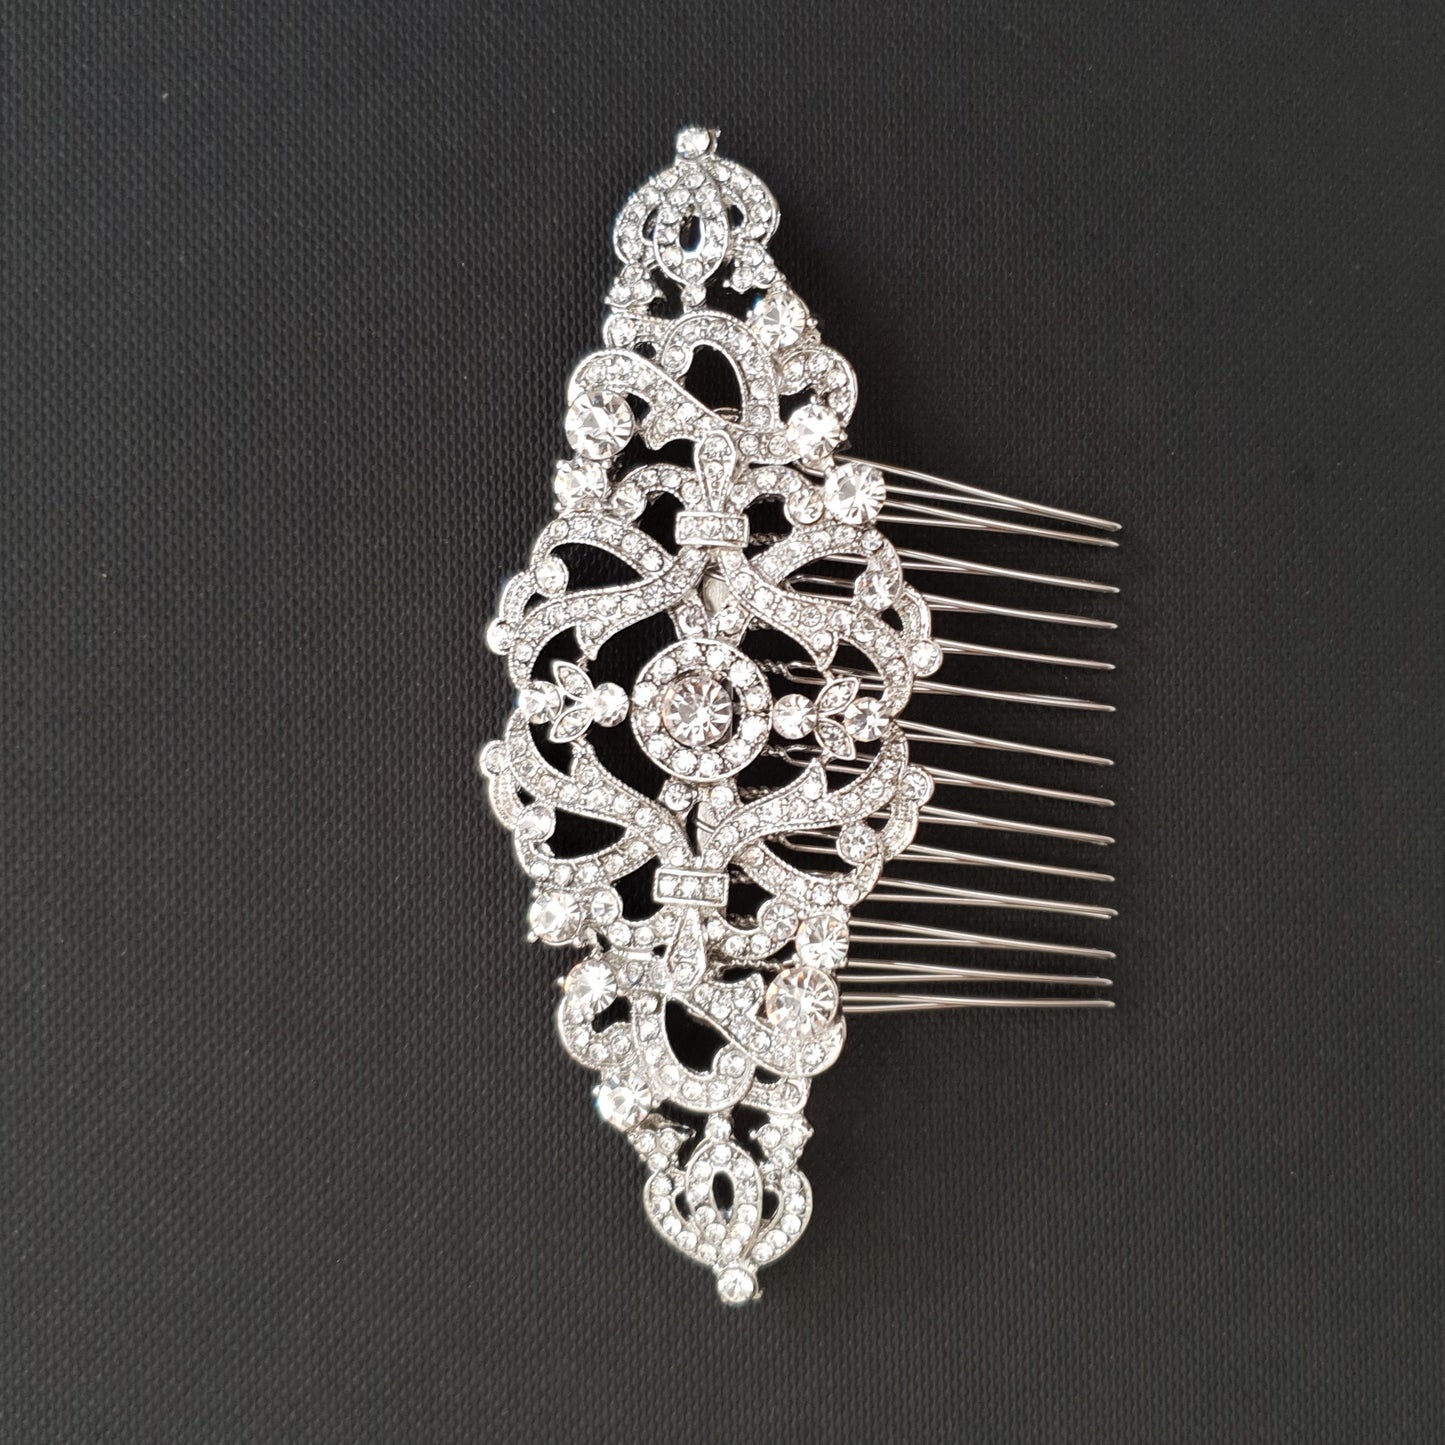 Vintage Crystal Hair Comb for Weddings-Seraphina